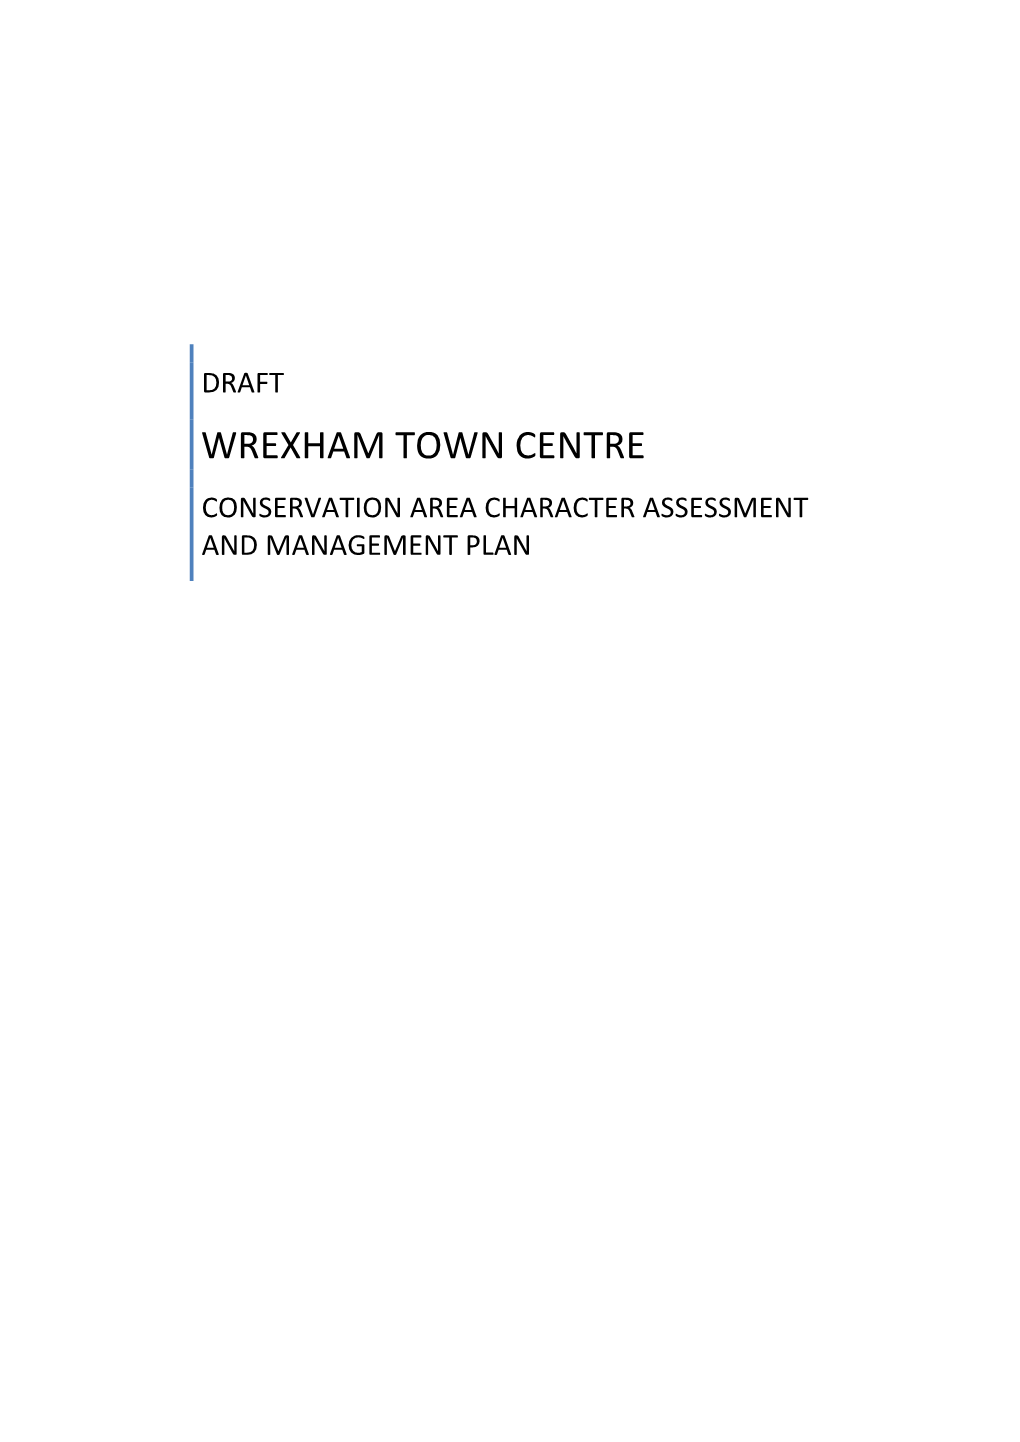 Wrexham Town Centre Conservation Area Character Assessment and Management Plan